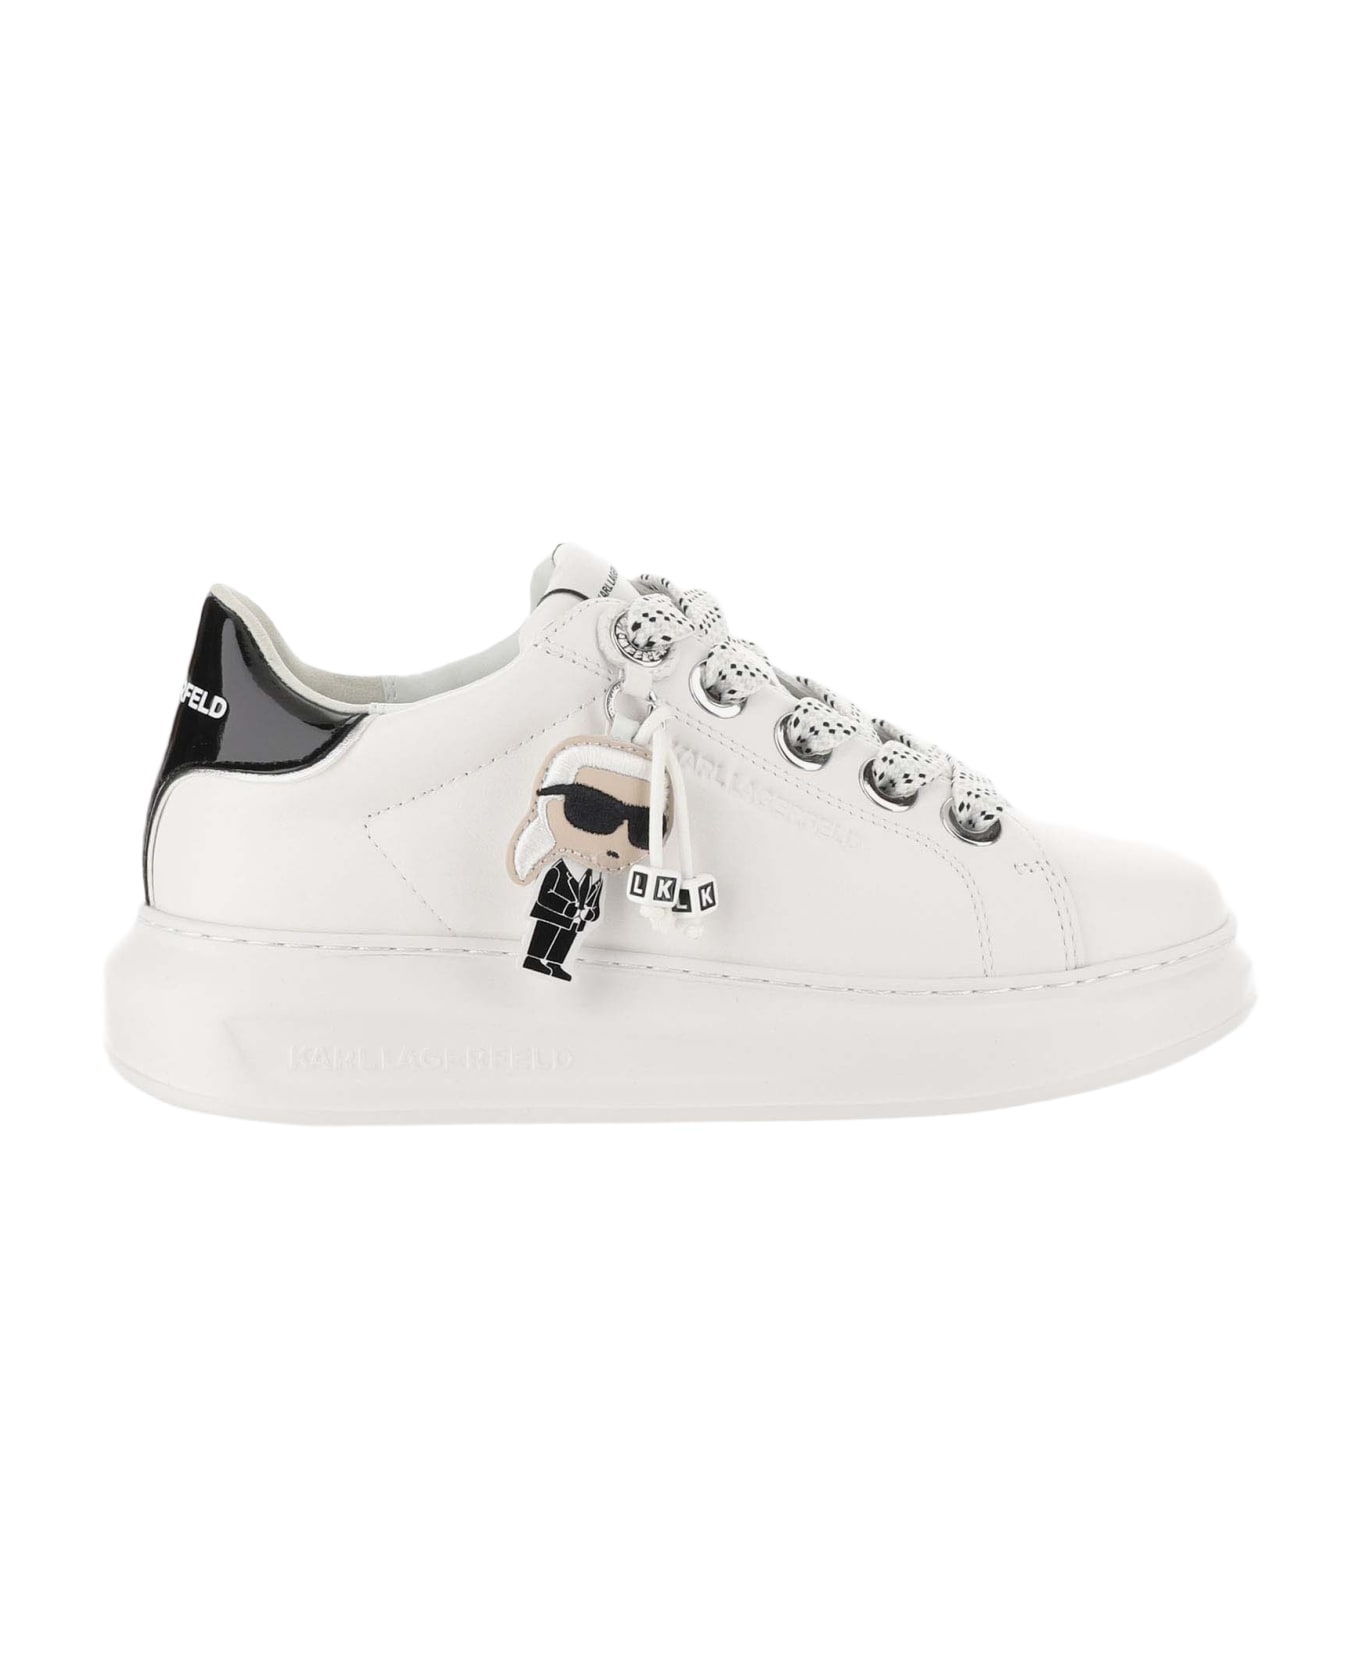 Karl Lagerfeld Leather Sneakers With Logo - White